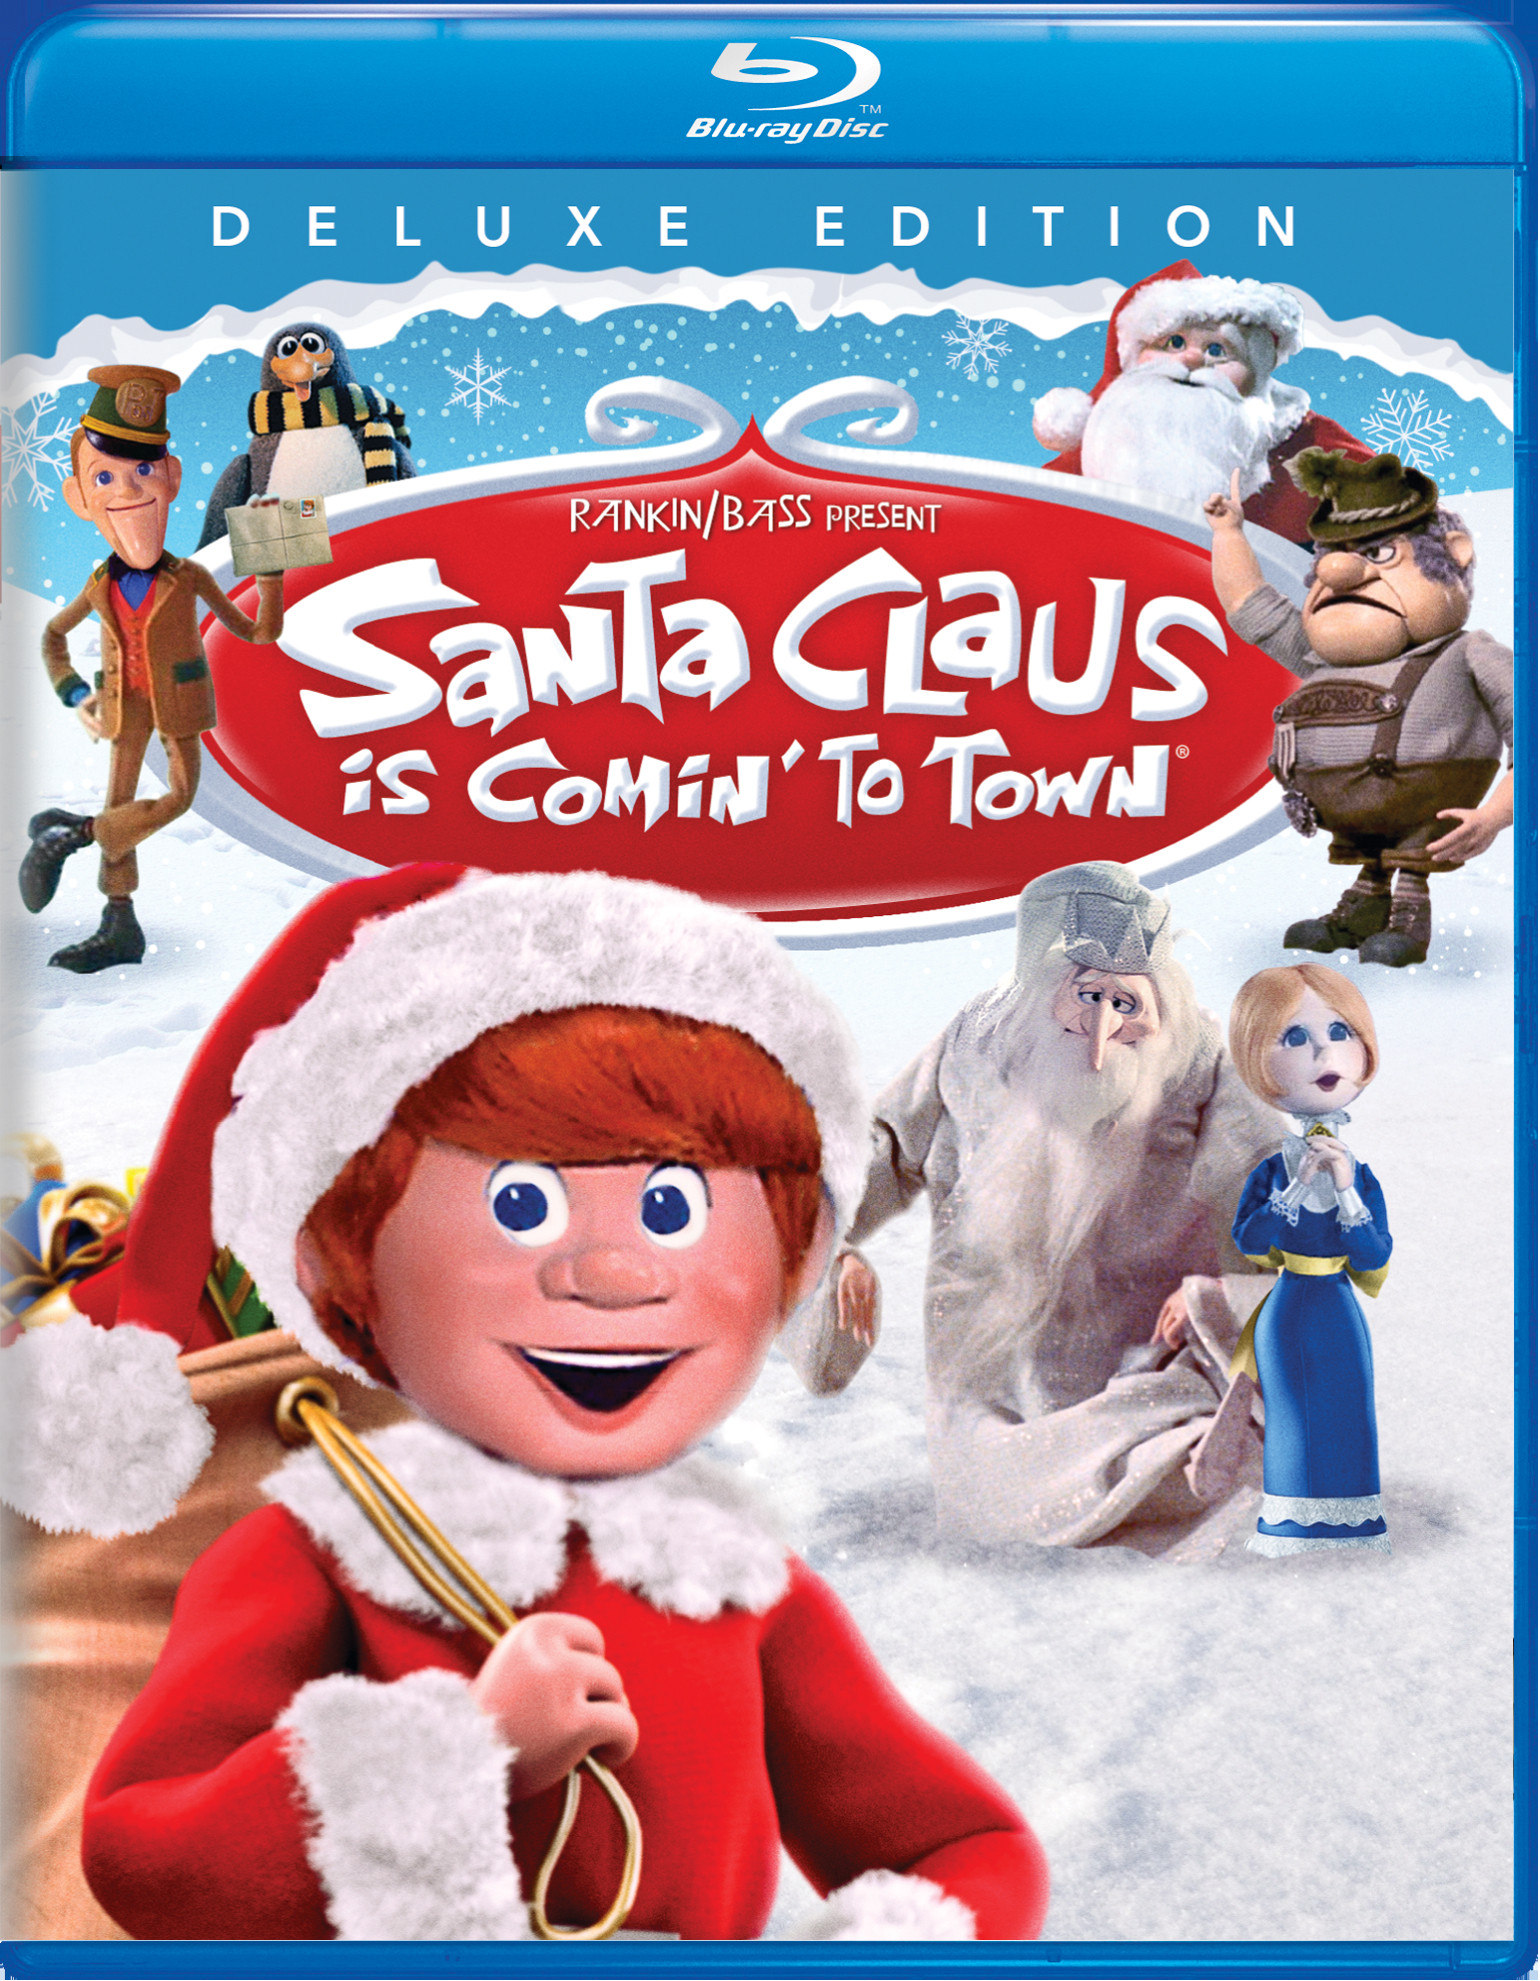 Santa Claus Is Comin' To Town (Deluxe Edition) - Blu-ray [ 1970 ]  - Children Movies On Blu-ray - Movies On GRUV